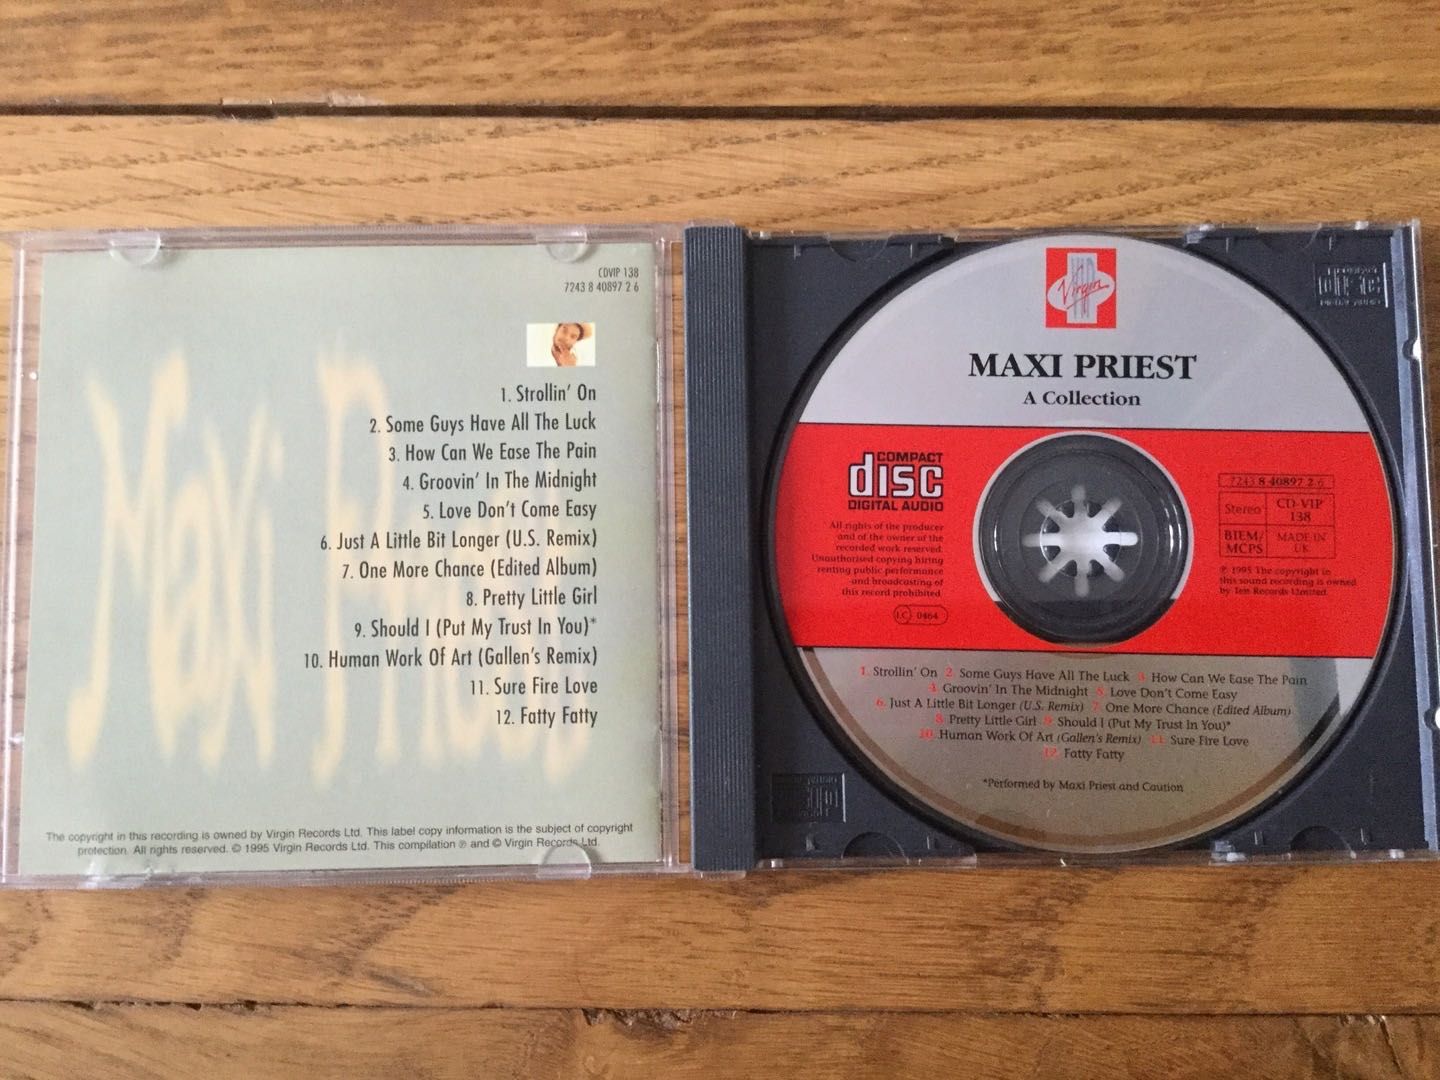 Maxi Priest - A COLLECTION (CD)